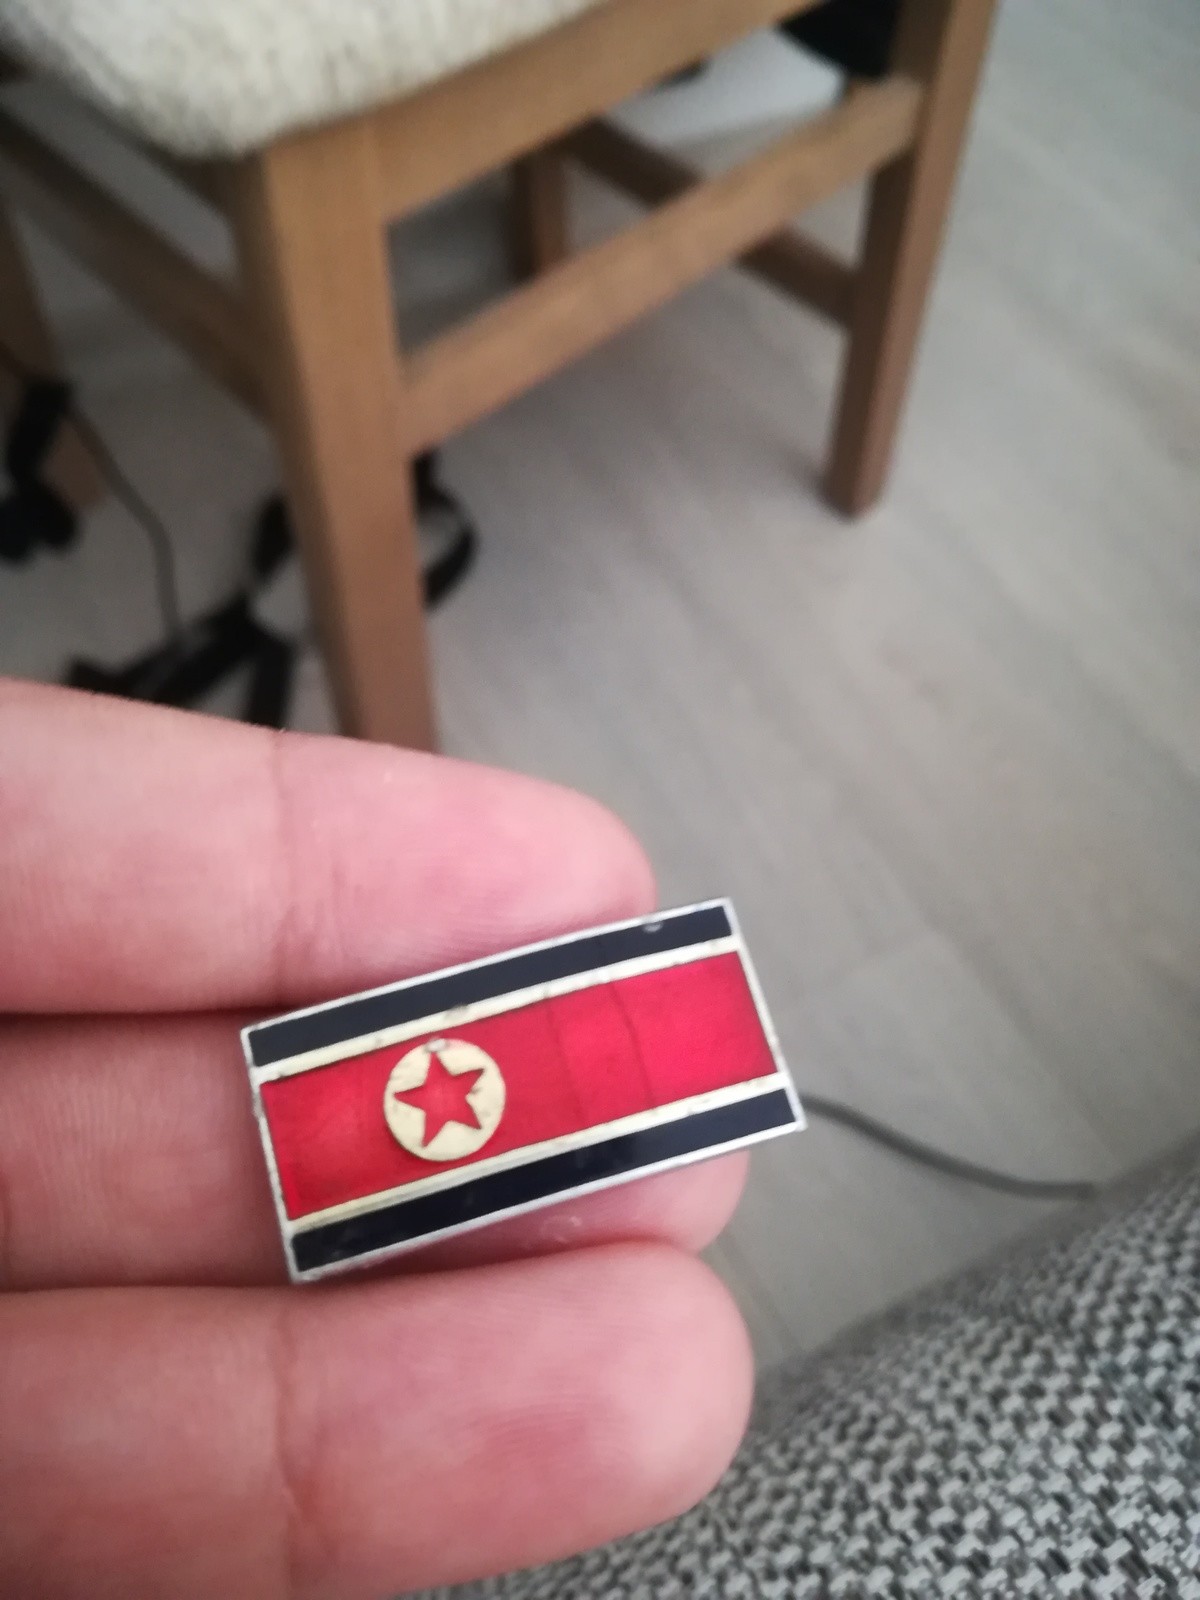 Weird North Korean flag I found in bosnia. Is this valuable? From what year is it?.. Any markings on the back?